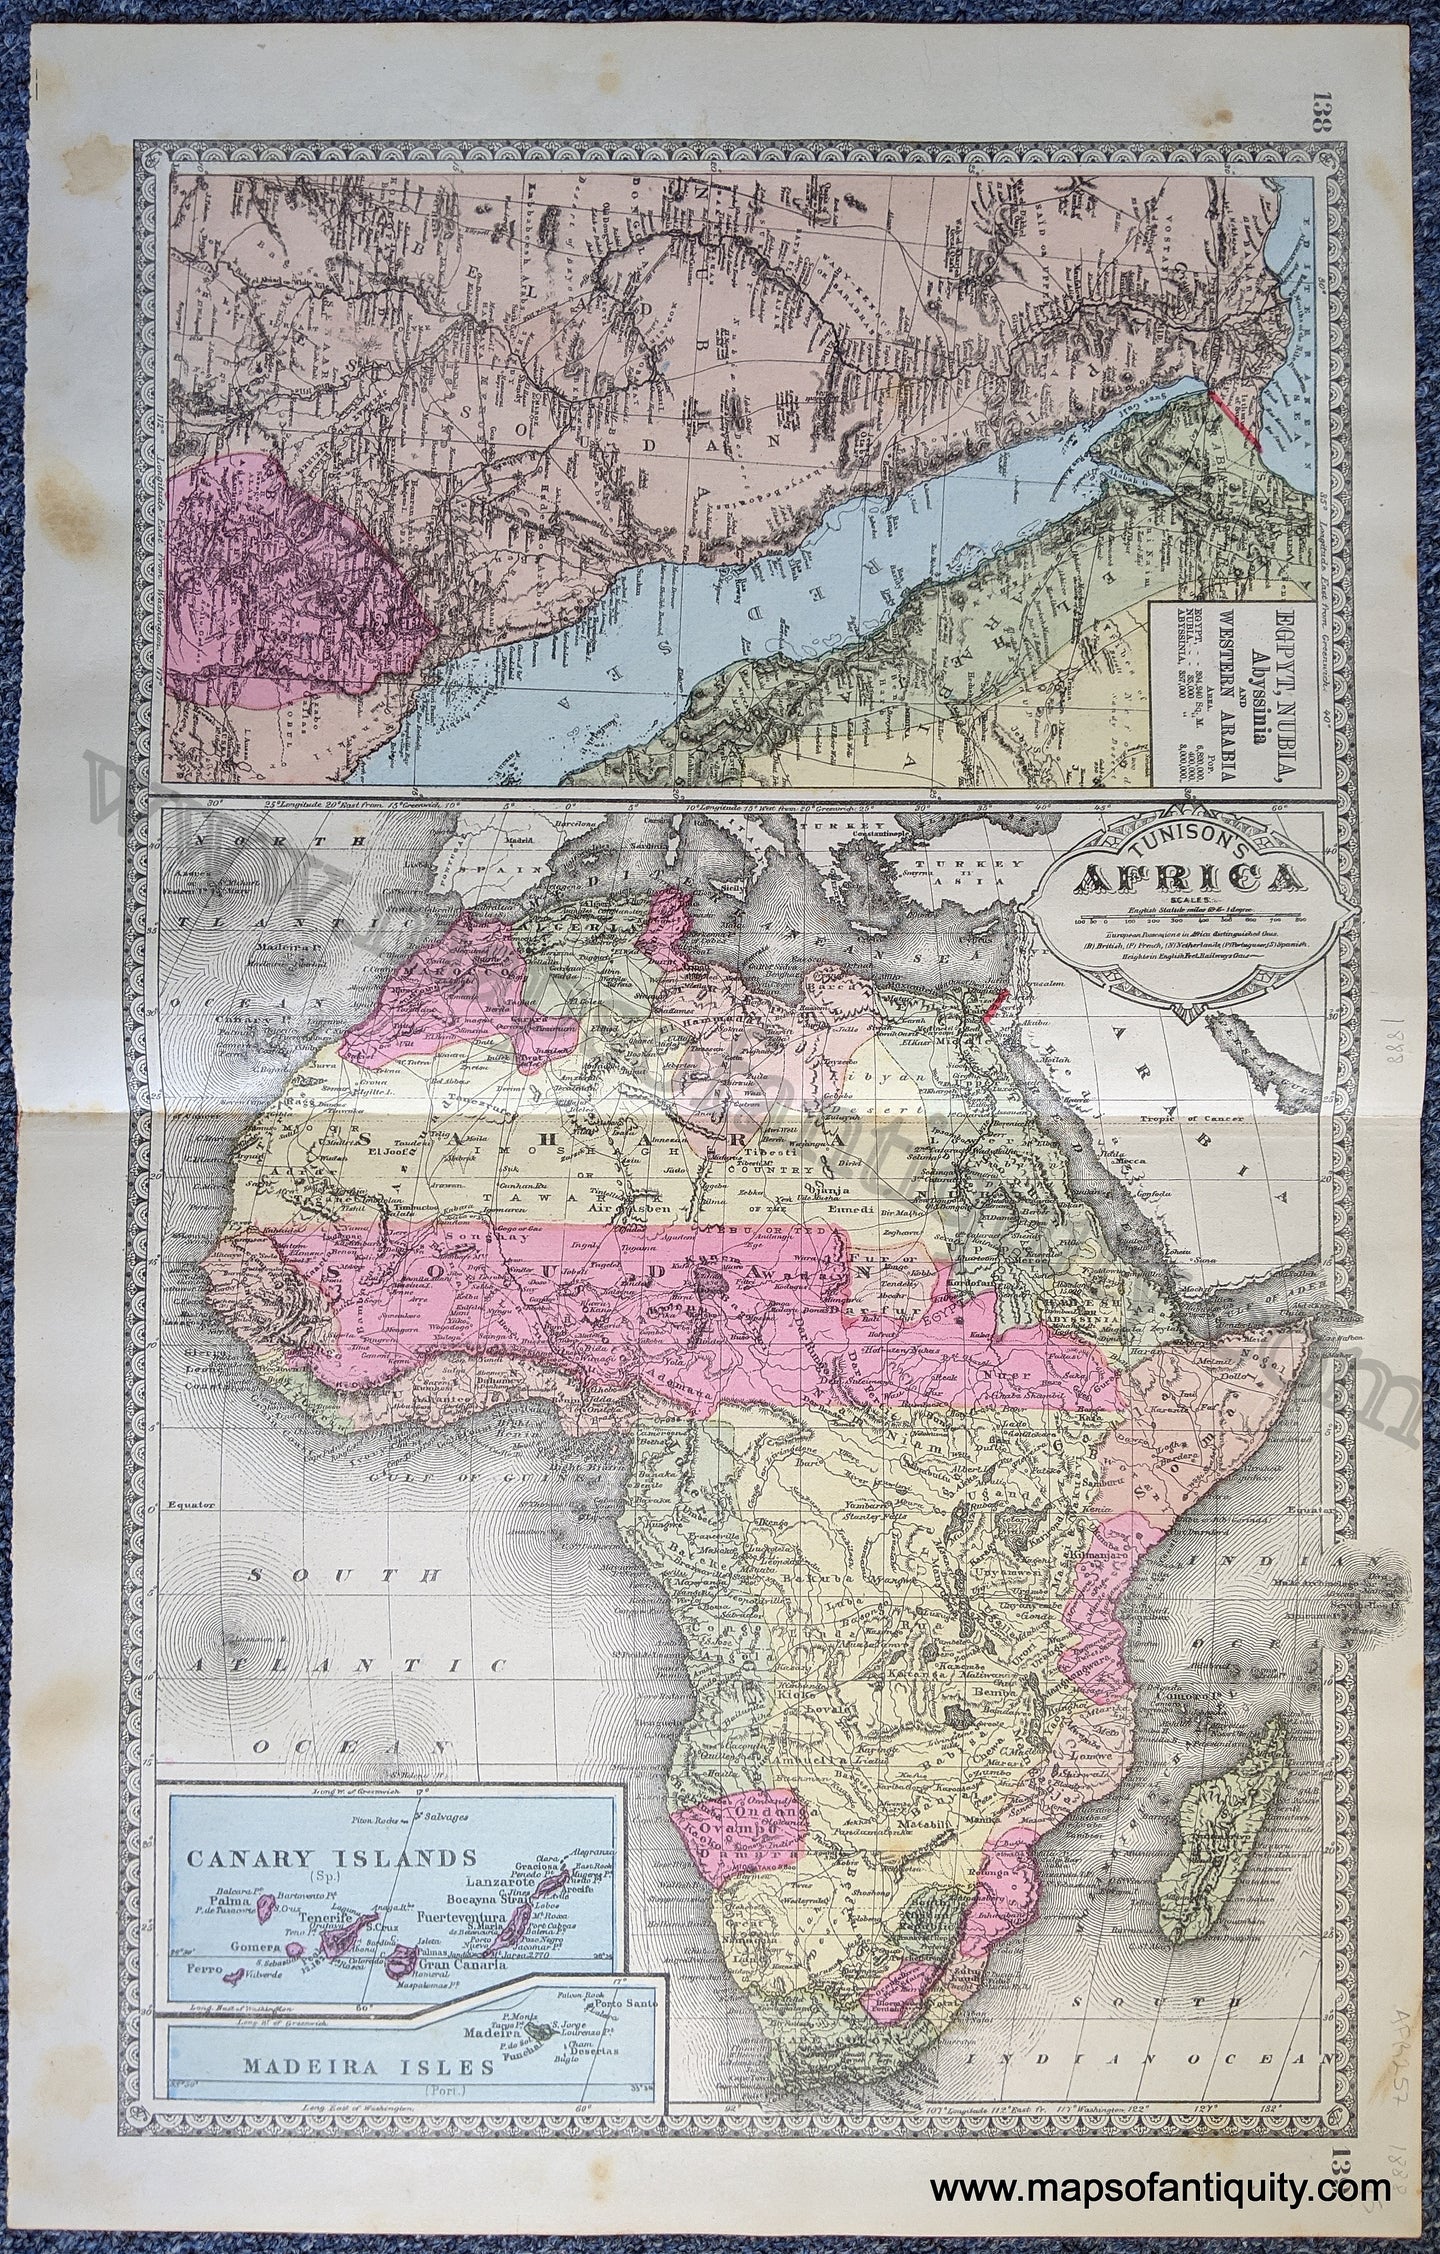 Antique-Print-Double-sided-sheet-with-multiple-maps:-Centerfold---Tunison's-Africa-;-versos:-Tunison's-Farther-India-and-Sunda-Isles-/-South-Africa-Africa-Asia-1888-Tunison-Maps-Of-Antiquity-1800s-19th-century